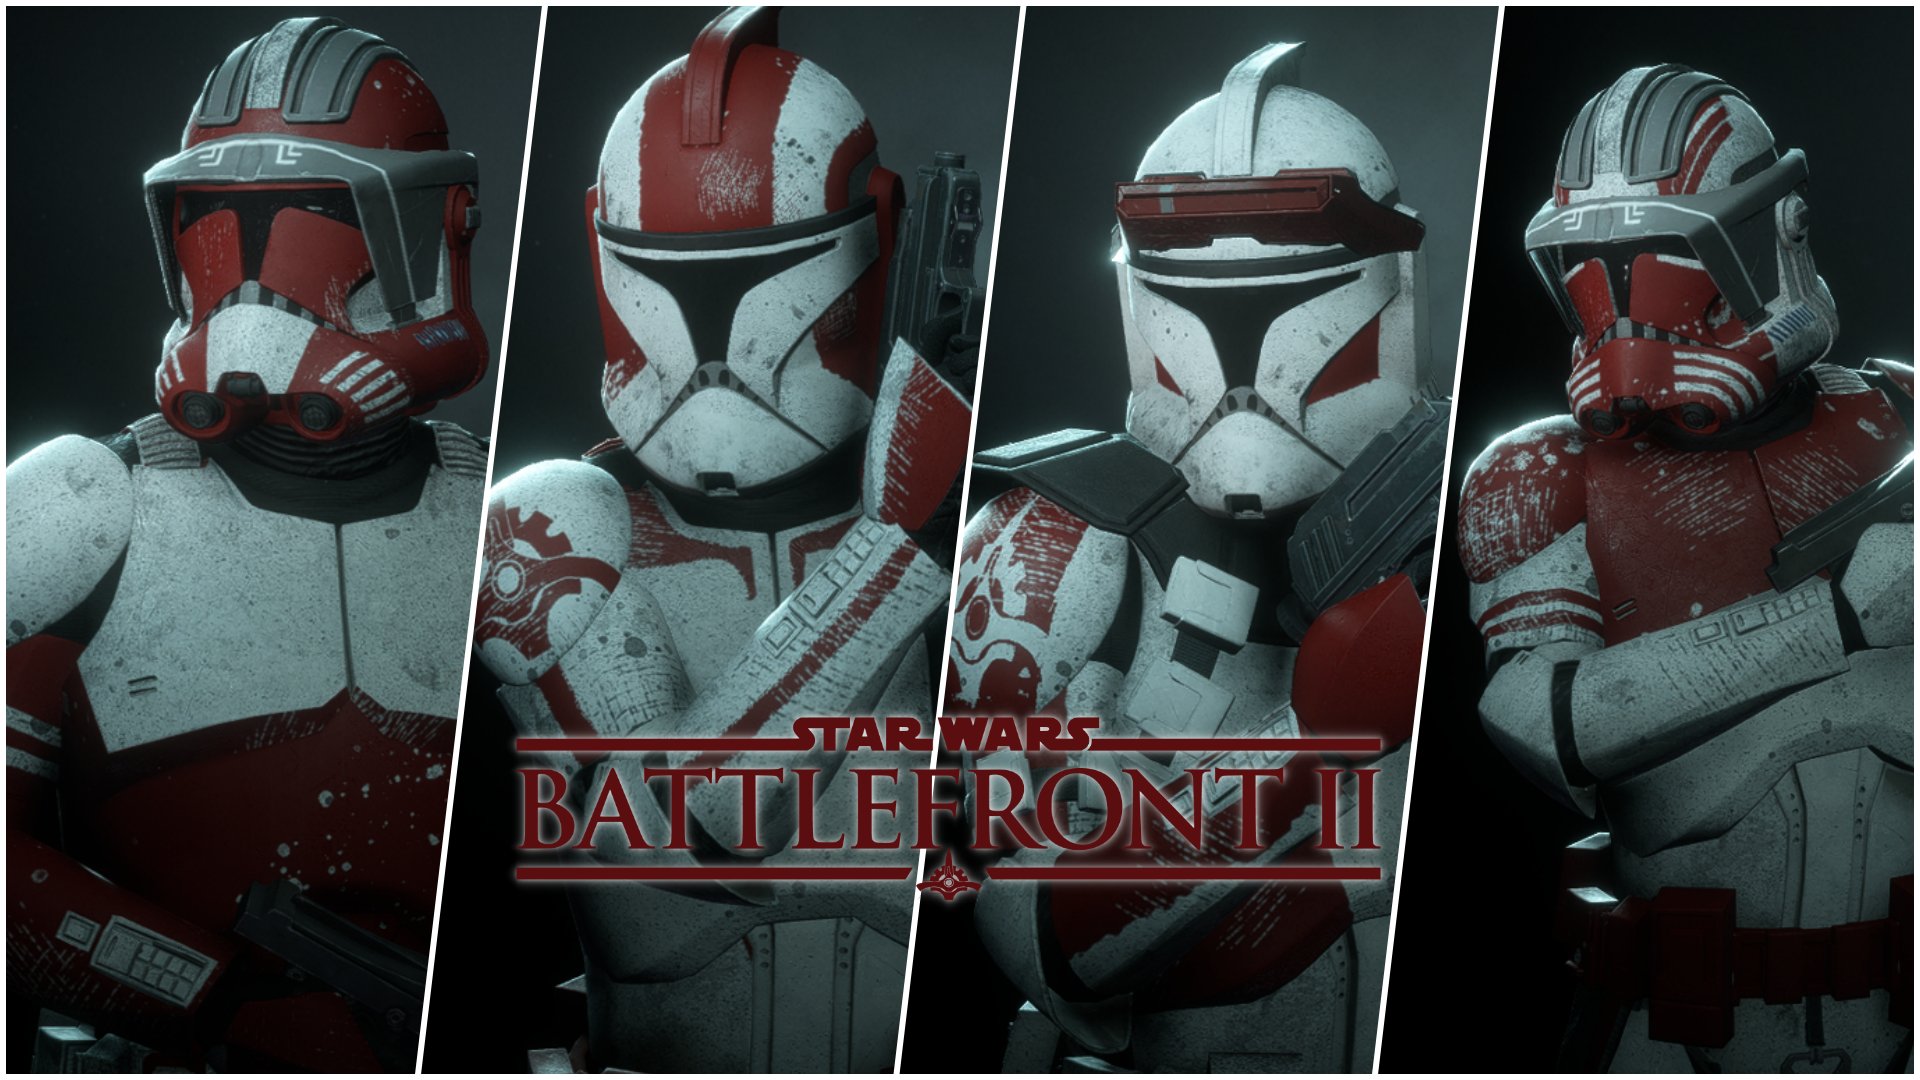 Mandalorian Business sur Twitter, Hello everyone! Today i am proud to announce the official release of the Commanders of the Coruscant Guards mod. 4 hero commanders with optional appearances and a